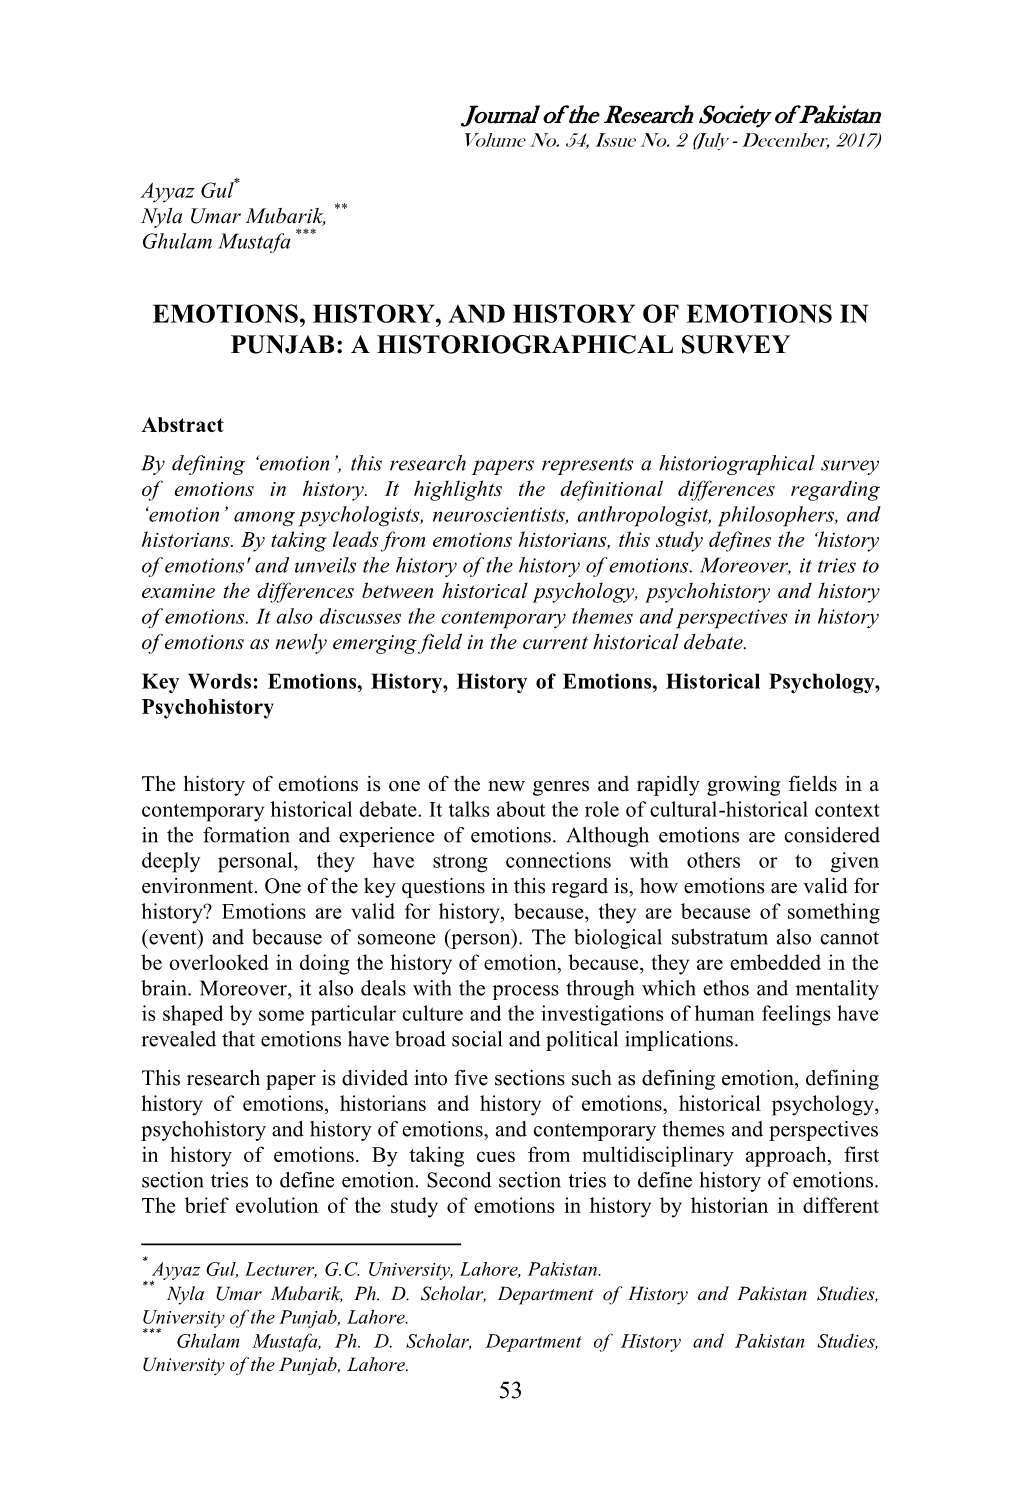 Emotions, History, and History of Emotions in Punjab: a Historiographical Survey